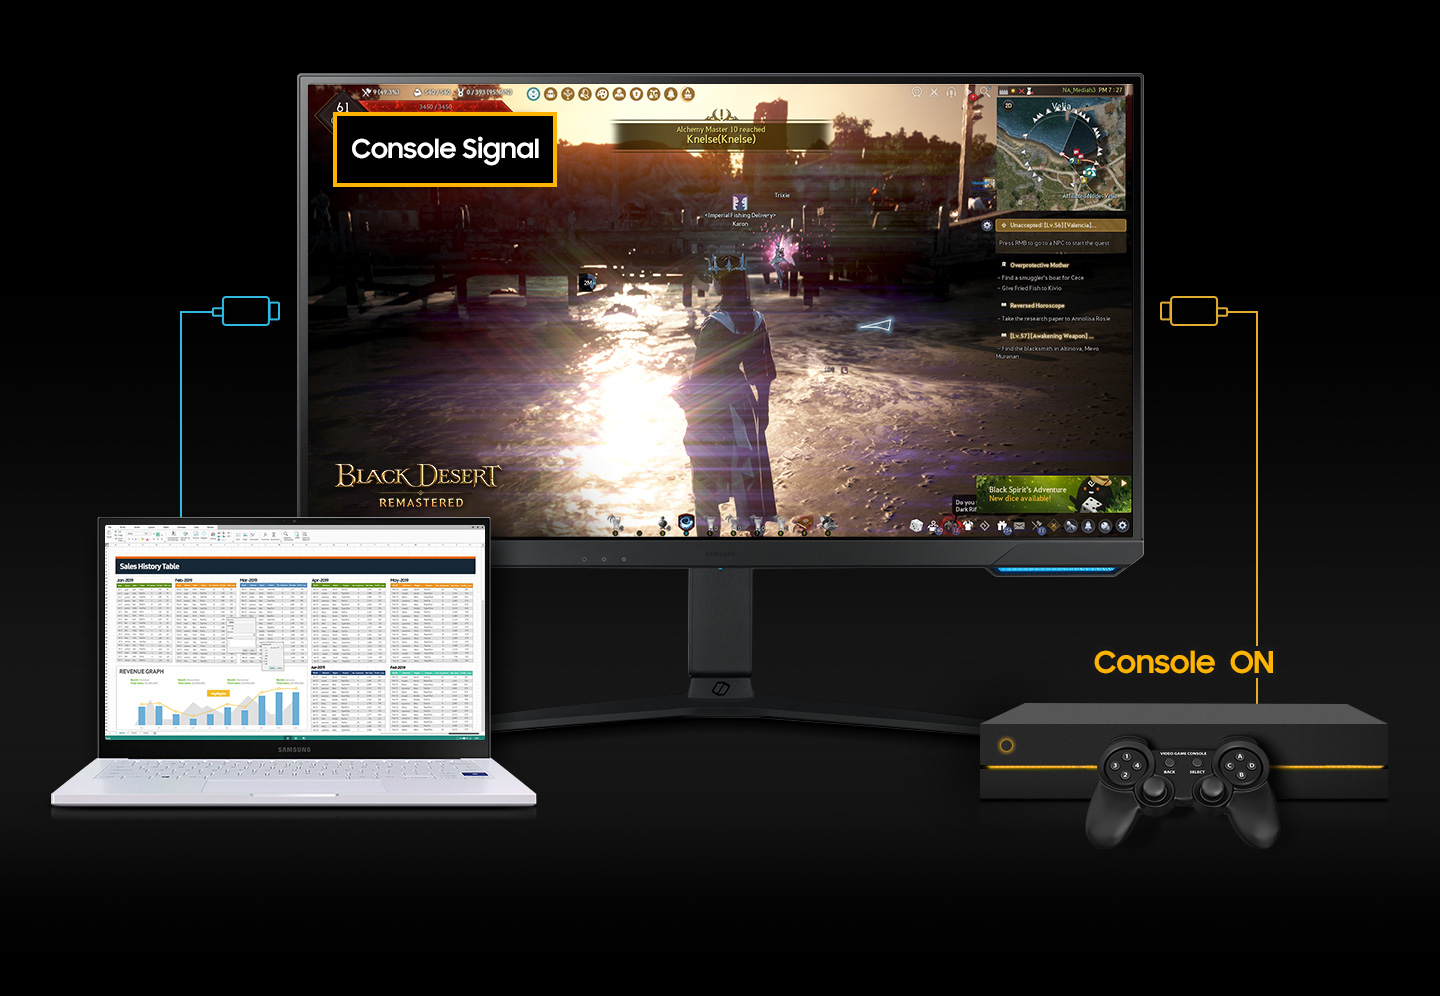 HDMI 2.1 Support and Auto Source Switch+ for Next-Gen Gaming